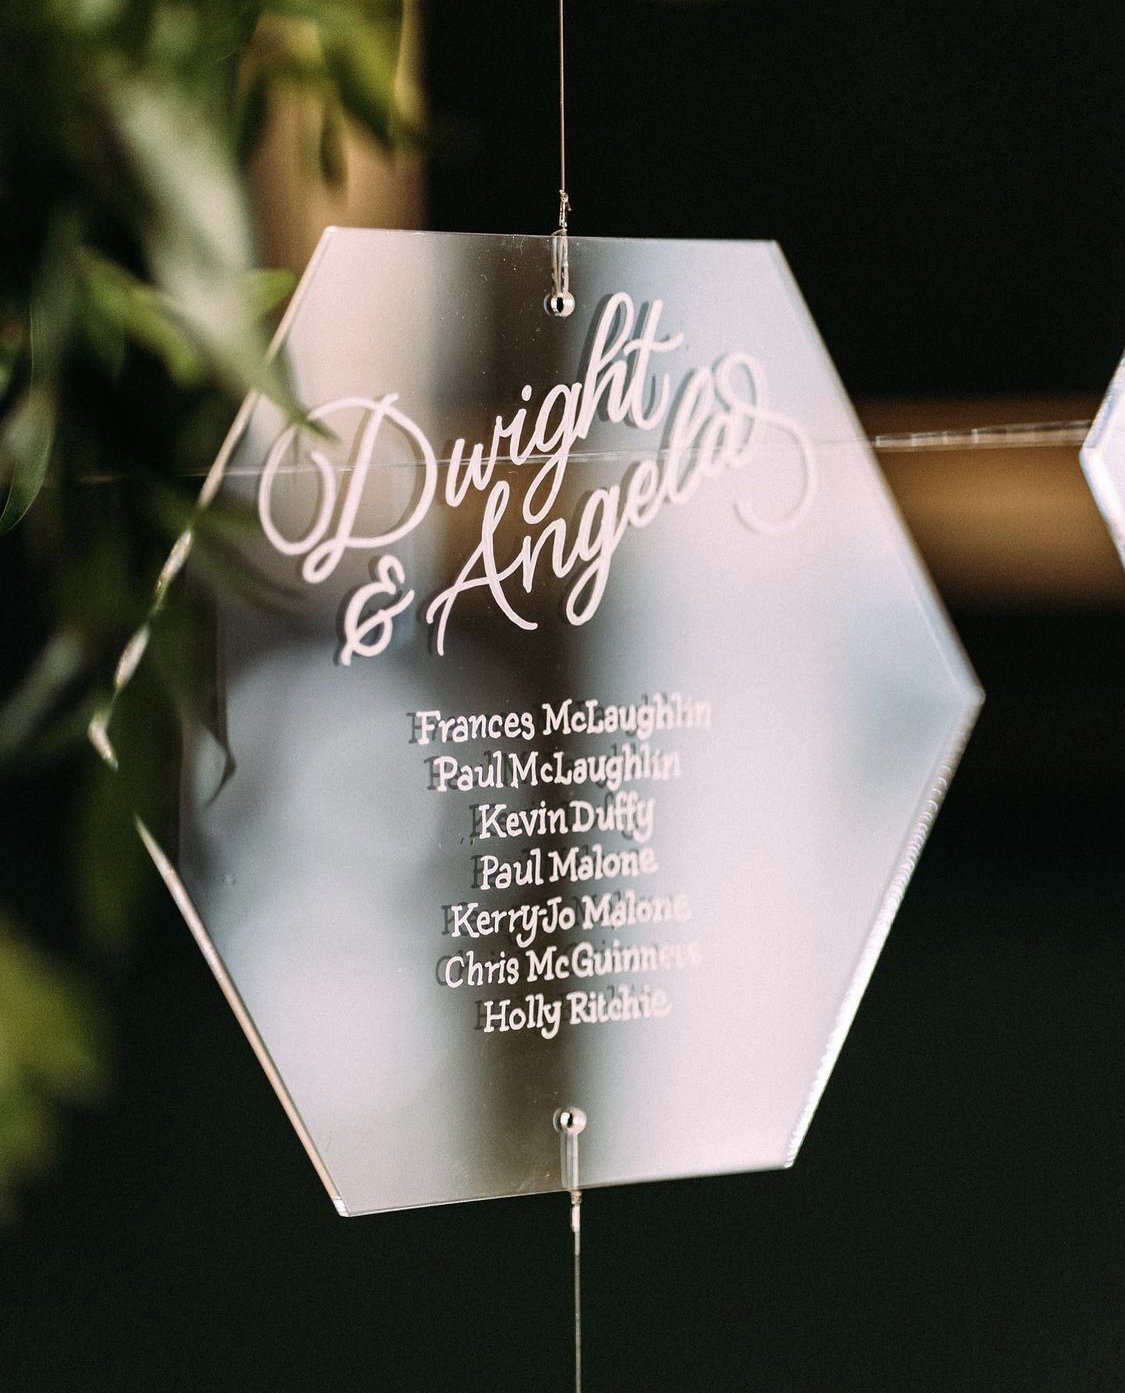  A hexagonal hanging acrylic table plan is hung on fishing wire. The bride and groom’s names are at the top with wedding guests names for that table underneath. The acrylic plan is displayed within green leaves which can just be seen to the left of t